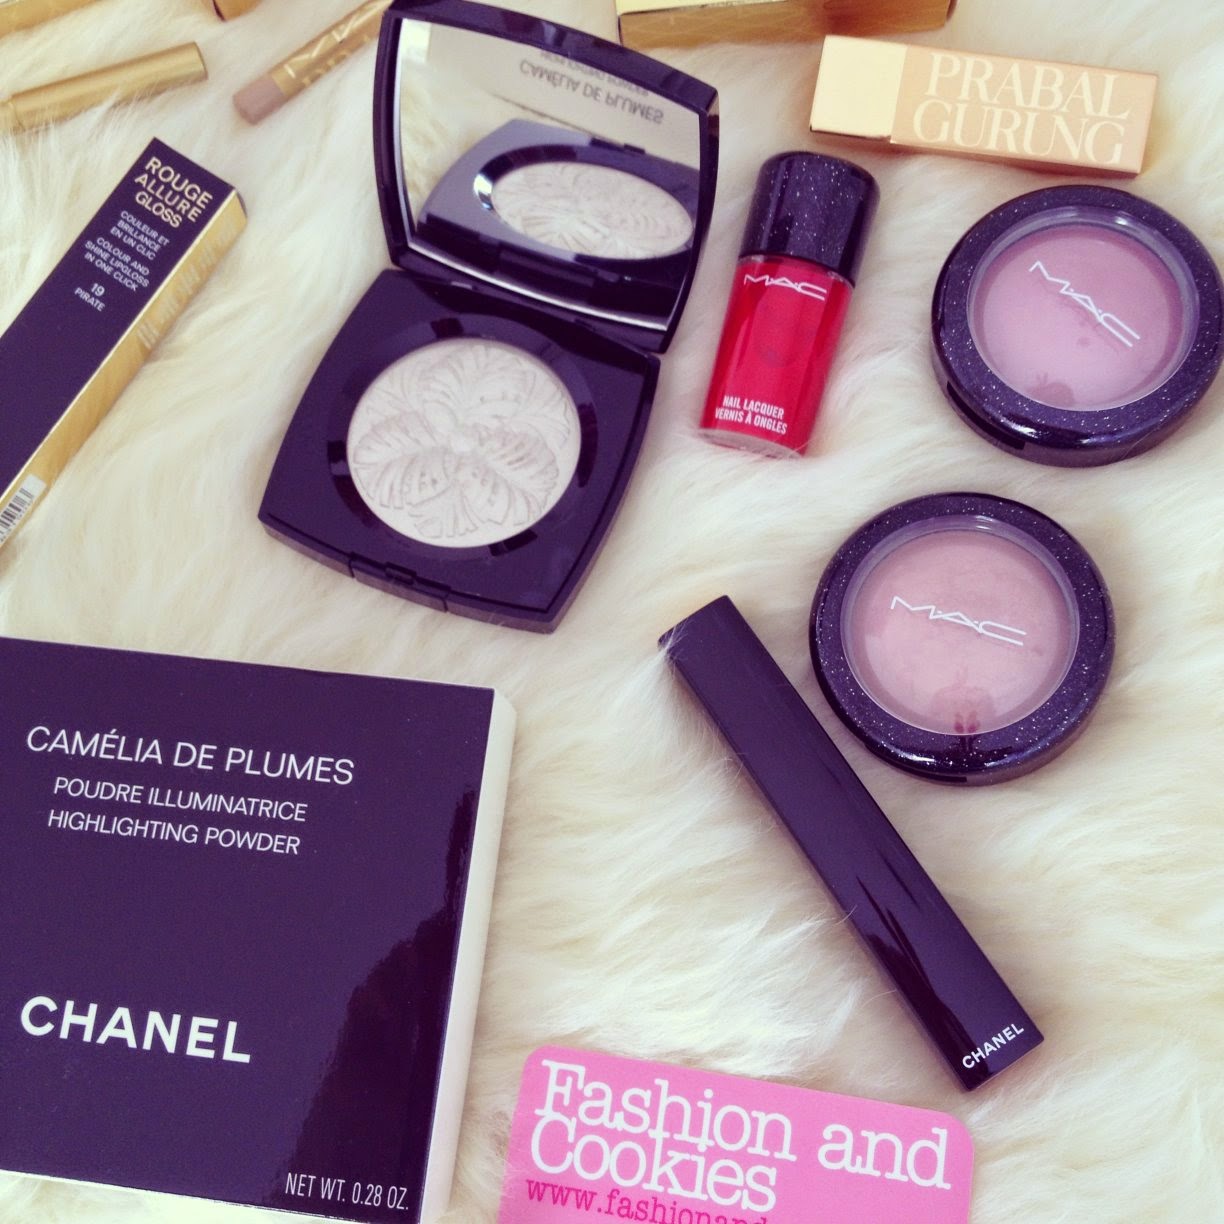 Makeup Holiday 2014 collection, Chanel Plumes precieuses makeup, Chanel Camelia d Plumes, Fashion and Cookies, fashion blogger